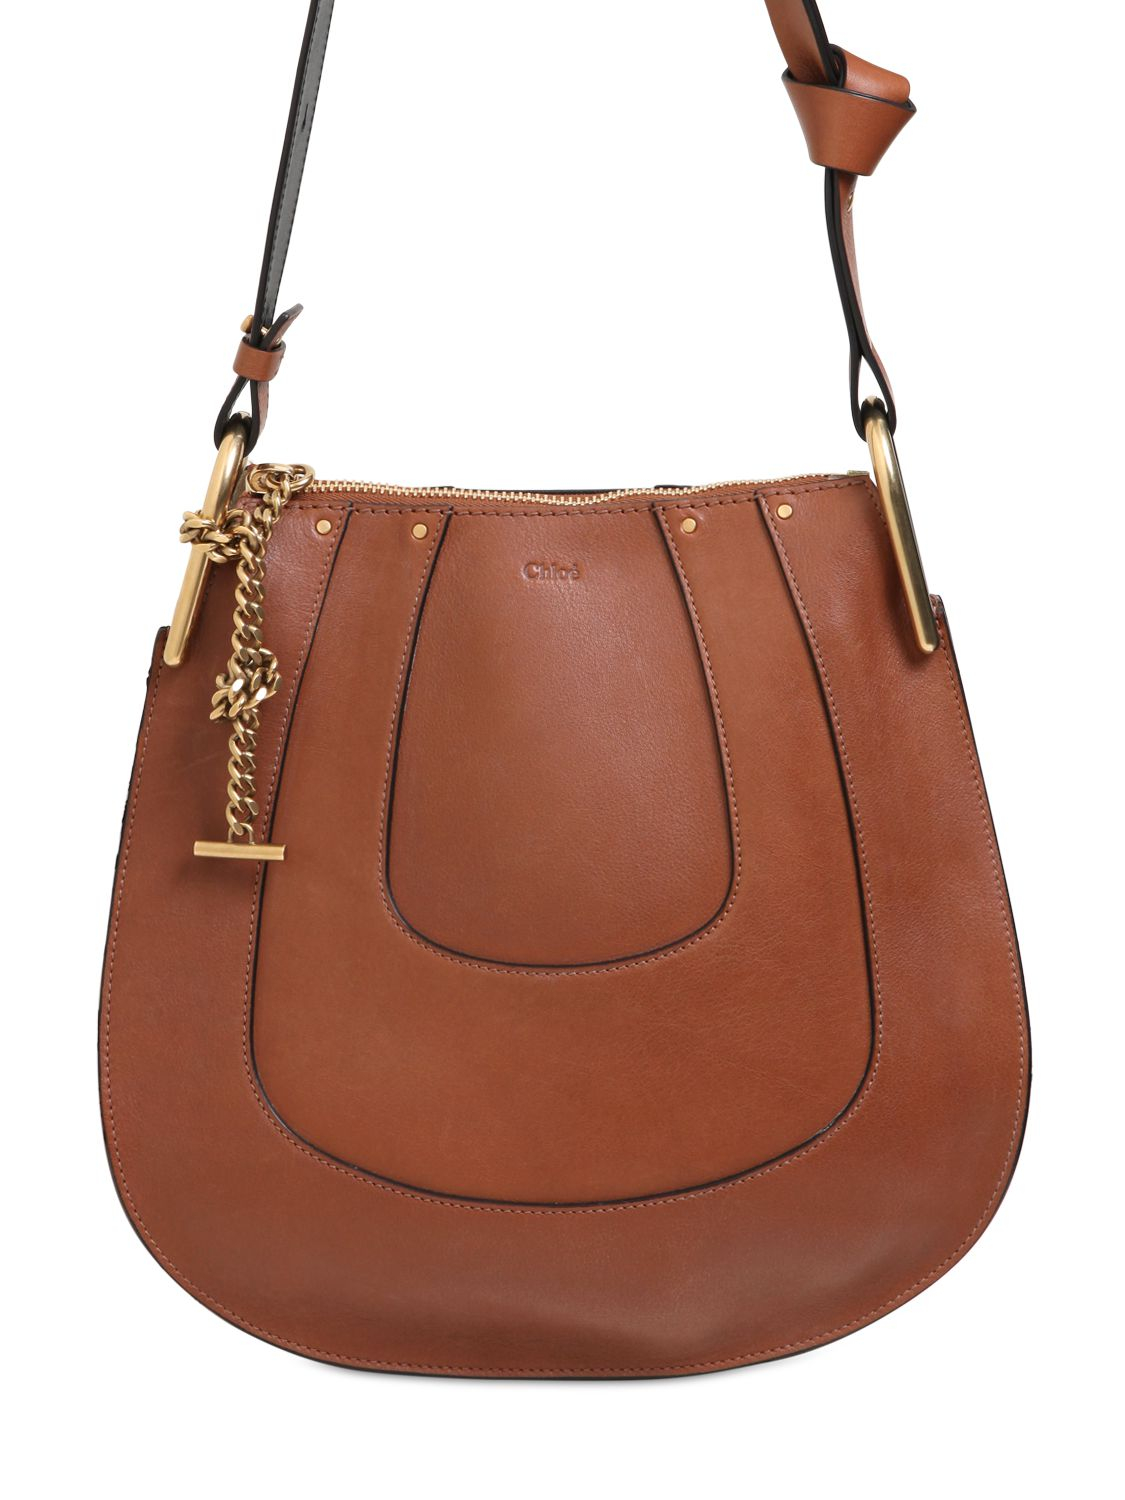 Lyst - Chloé Small Hayley Smooth Leather Hobo Bag in Brown